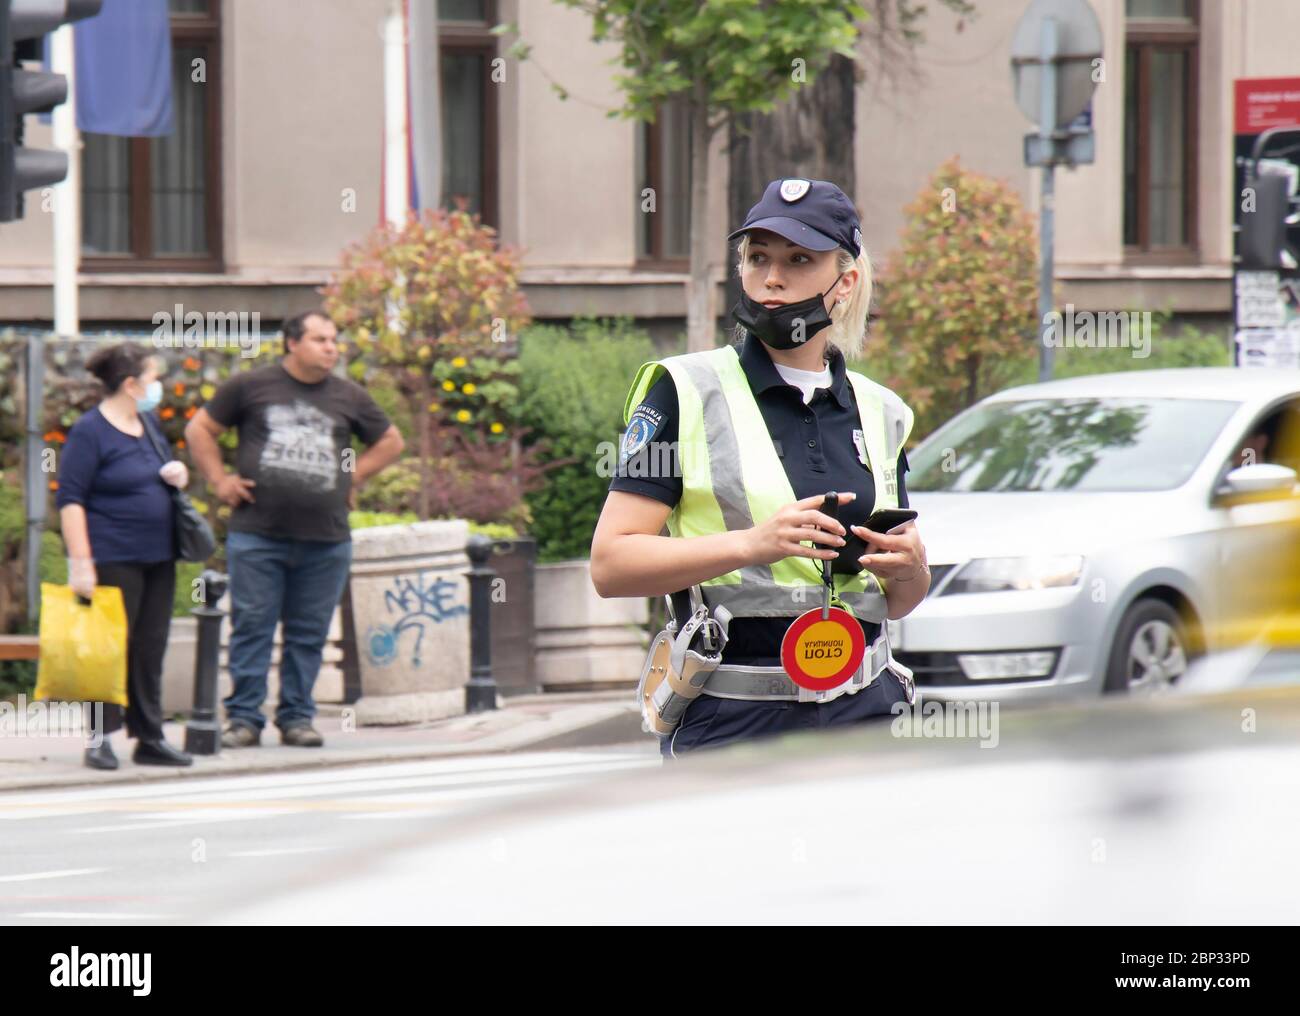 Belgrade, Serbia - May 15, 2020: Policewoman on duty, standing in the intersection with traffic in motion blur Stock Photo